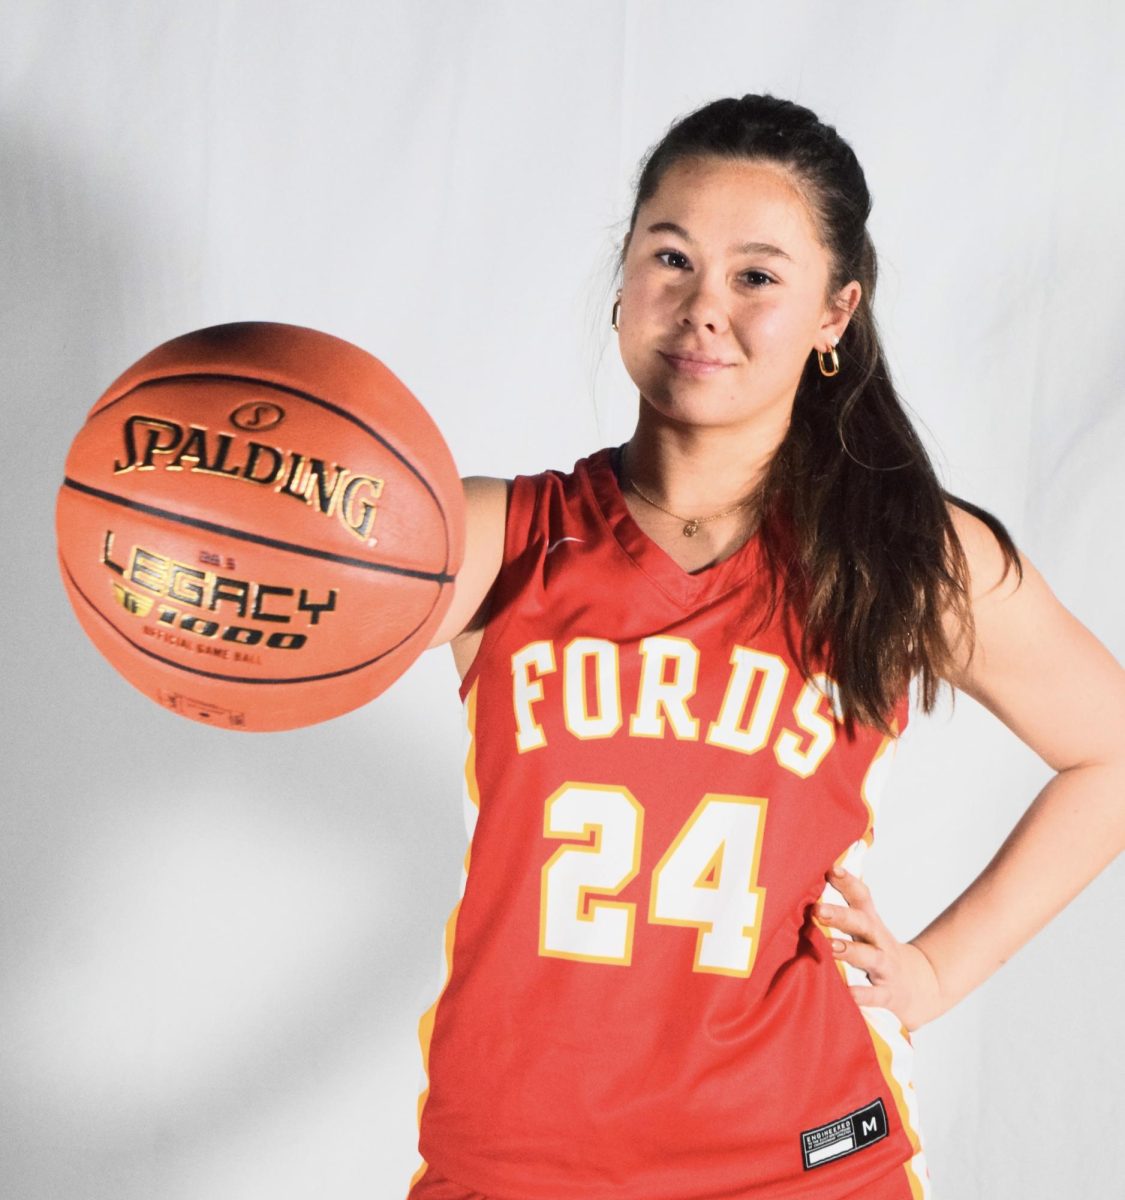 Mya+Foley+shows+her+H-Pride+at+media+day%2C+preparing+for+an+exciting+basketball+season.